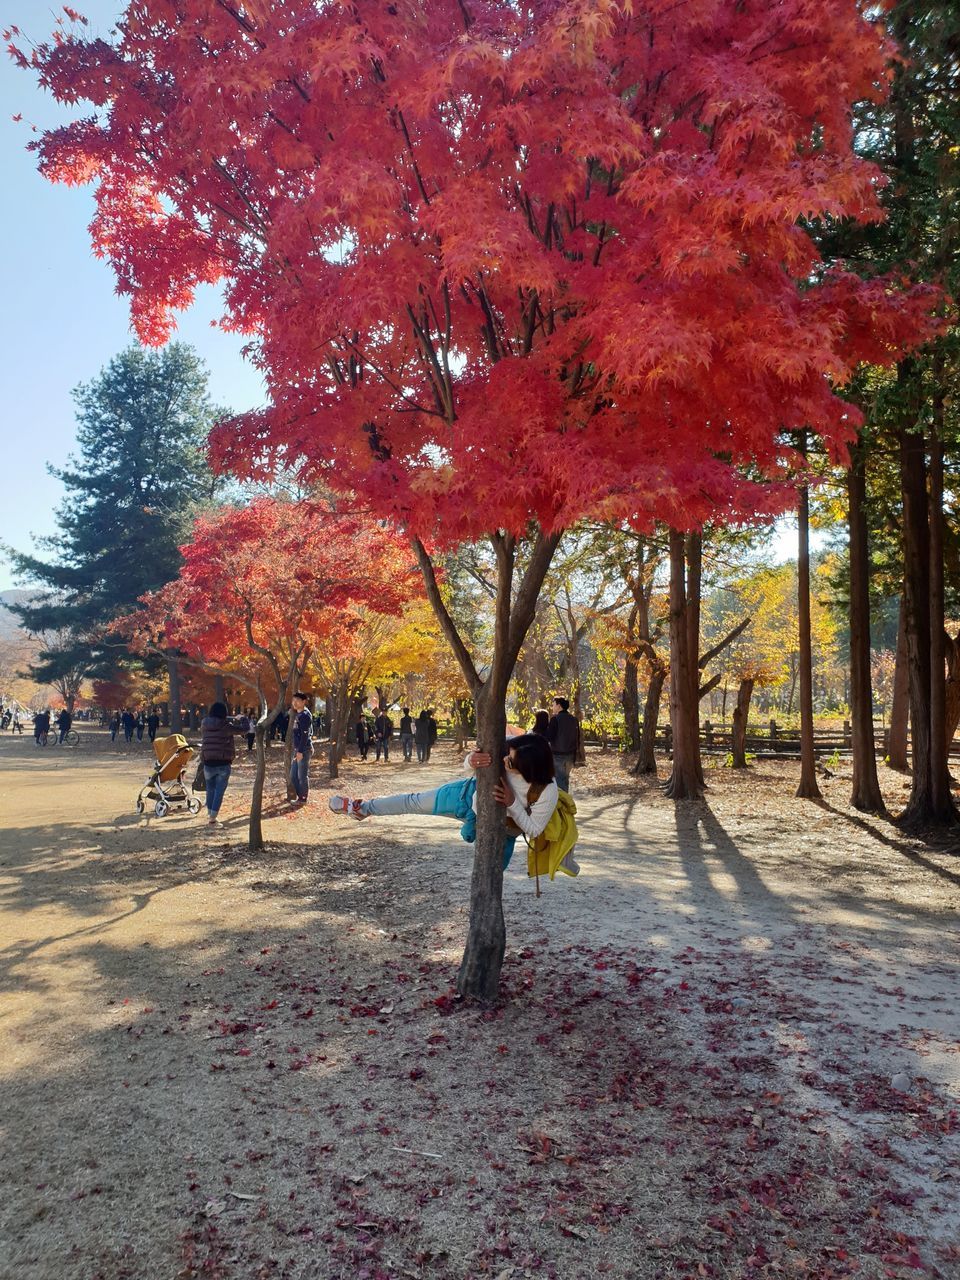 PEOPLE ON PARK DURING AUTUMN